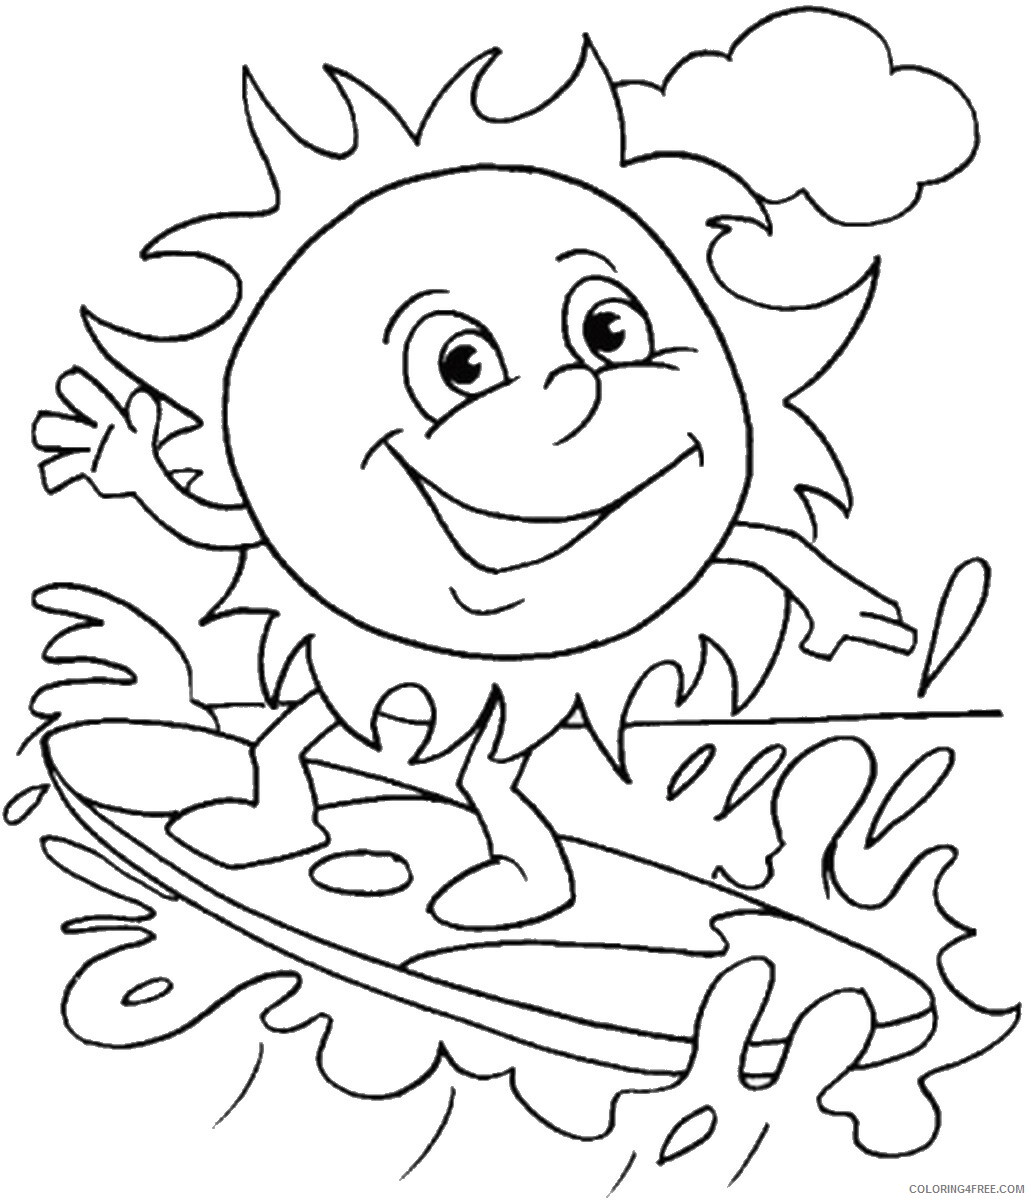 Summer Coloring Pages Nature summer_cl_24 Printable 2021 662 Coloring4free